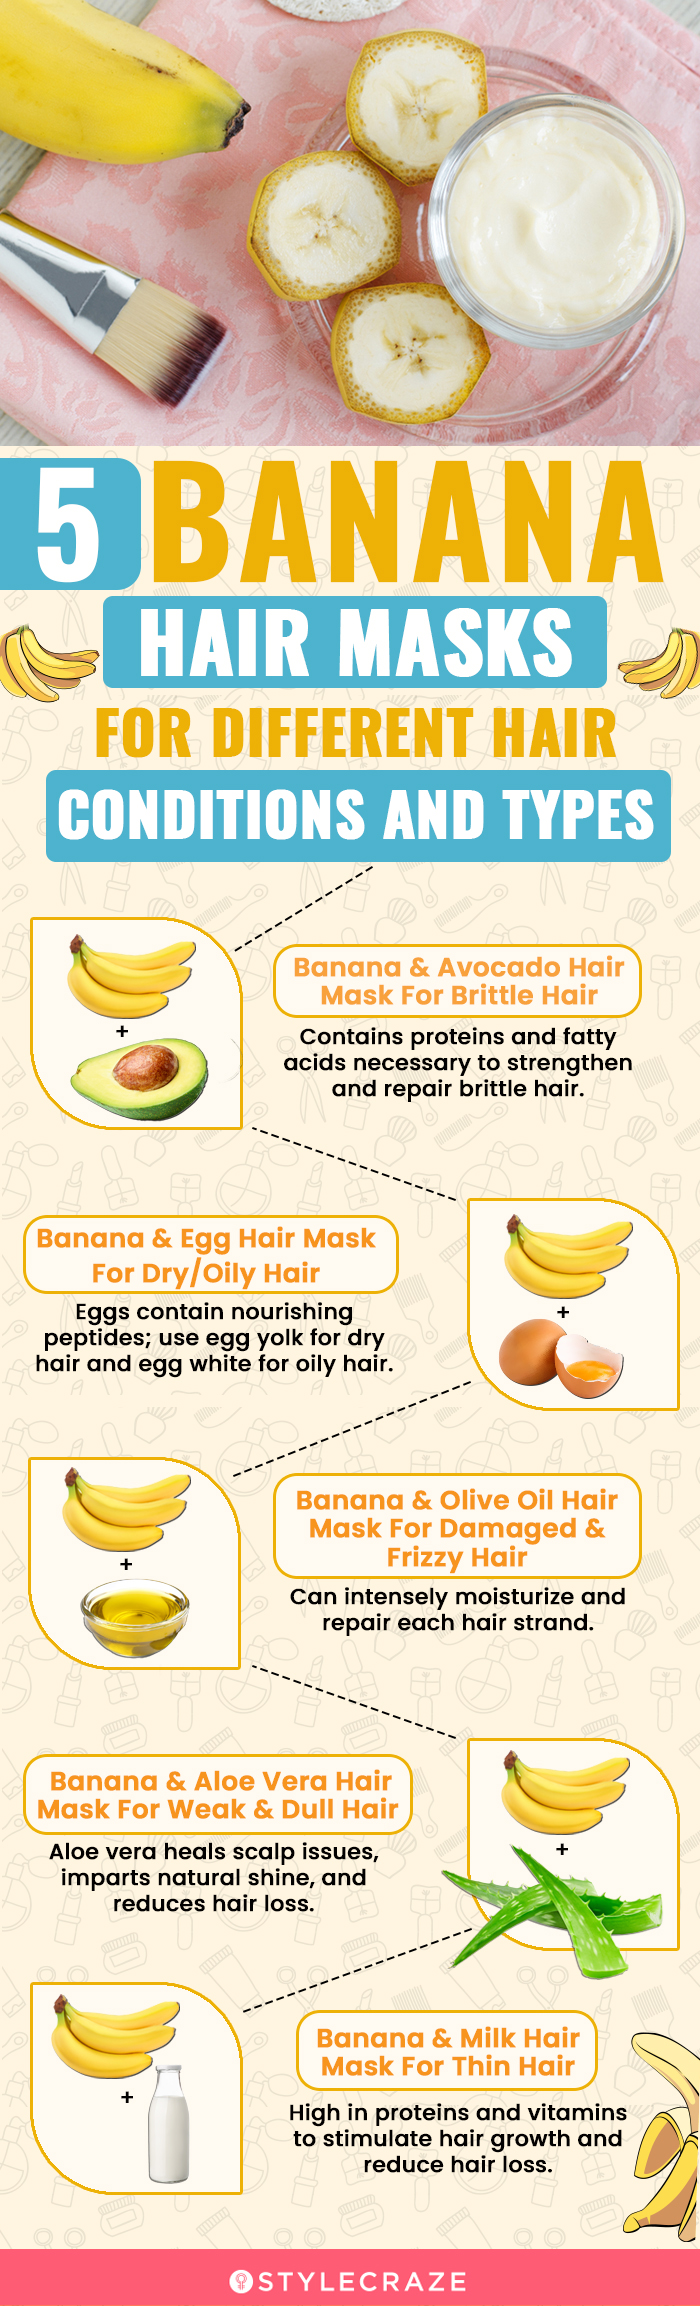 5 banana hair masks for different hair conditions and types (infographic)